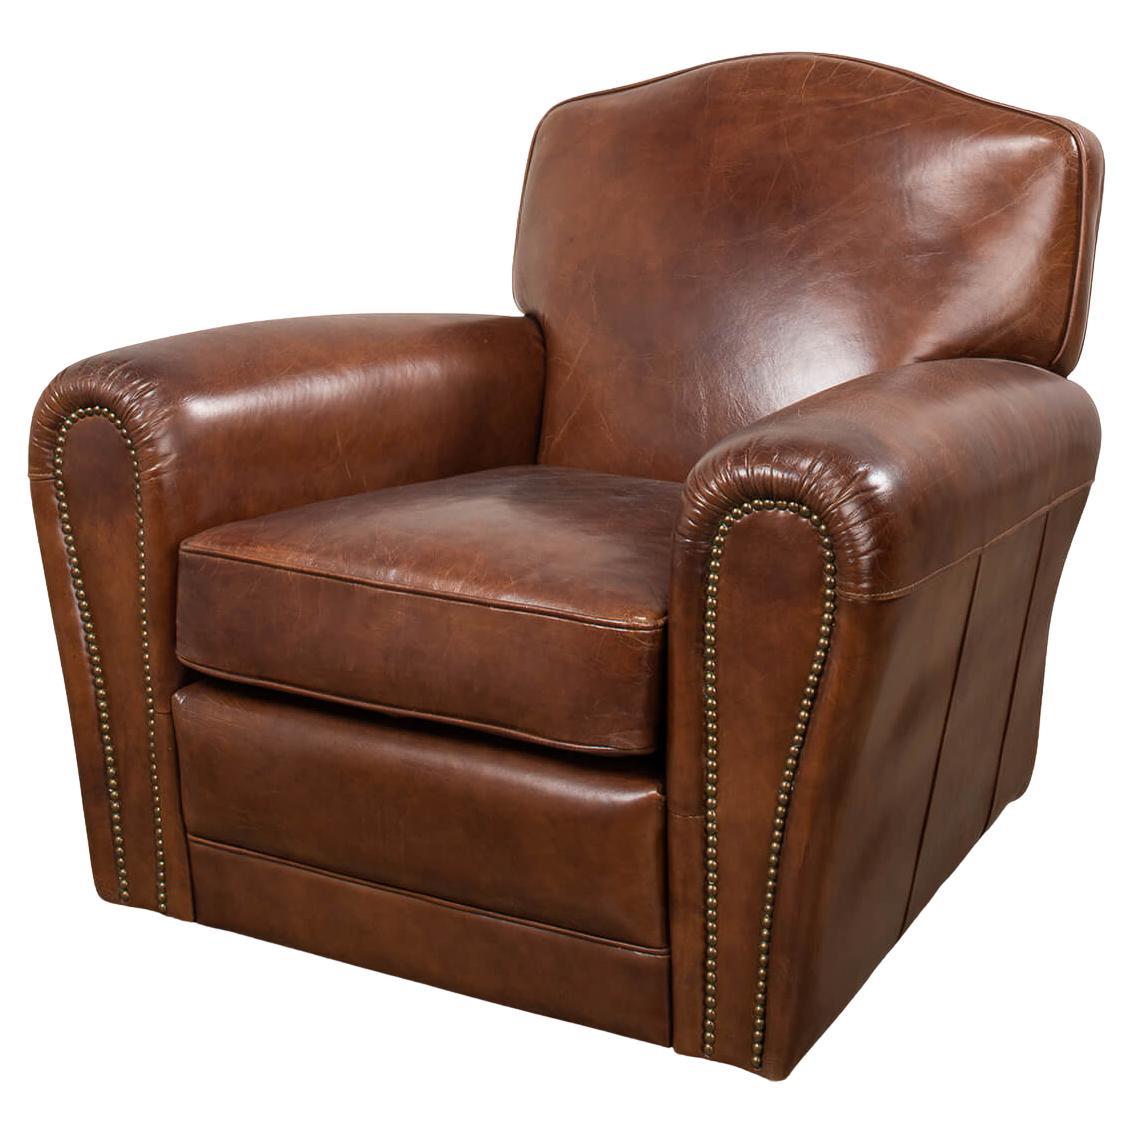 French Art Deco Style Leather Club Chair